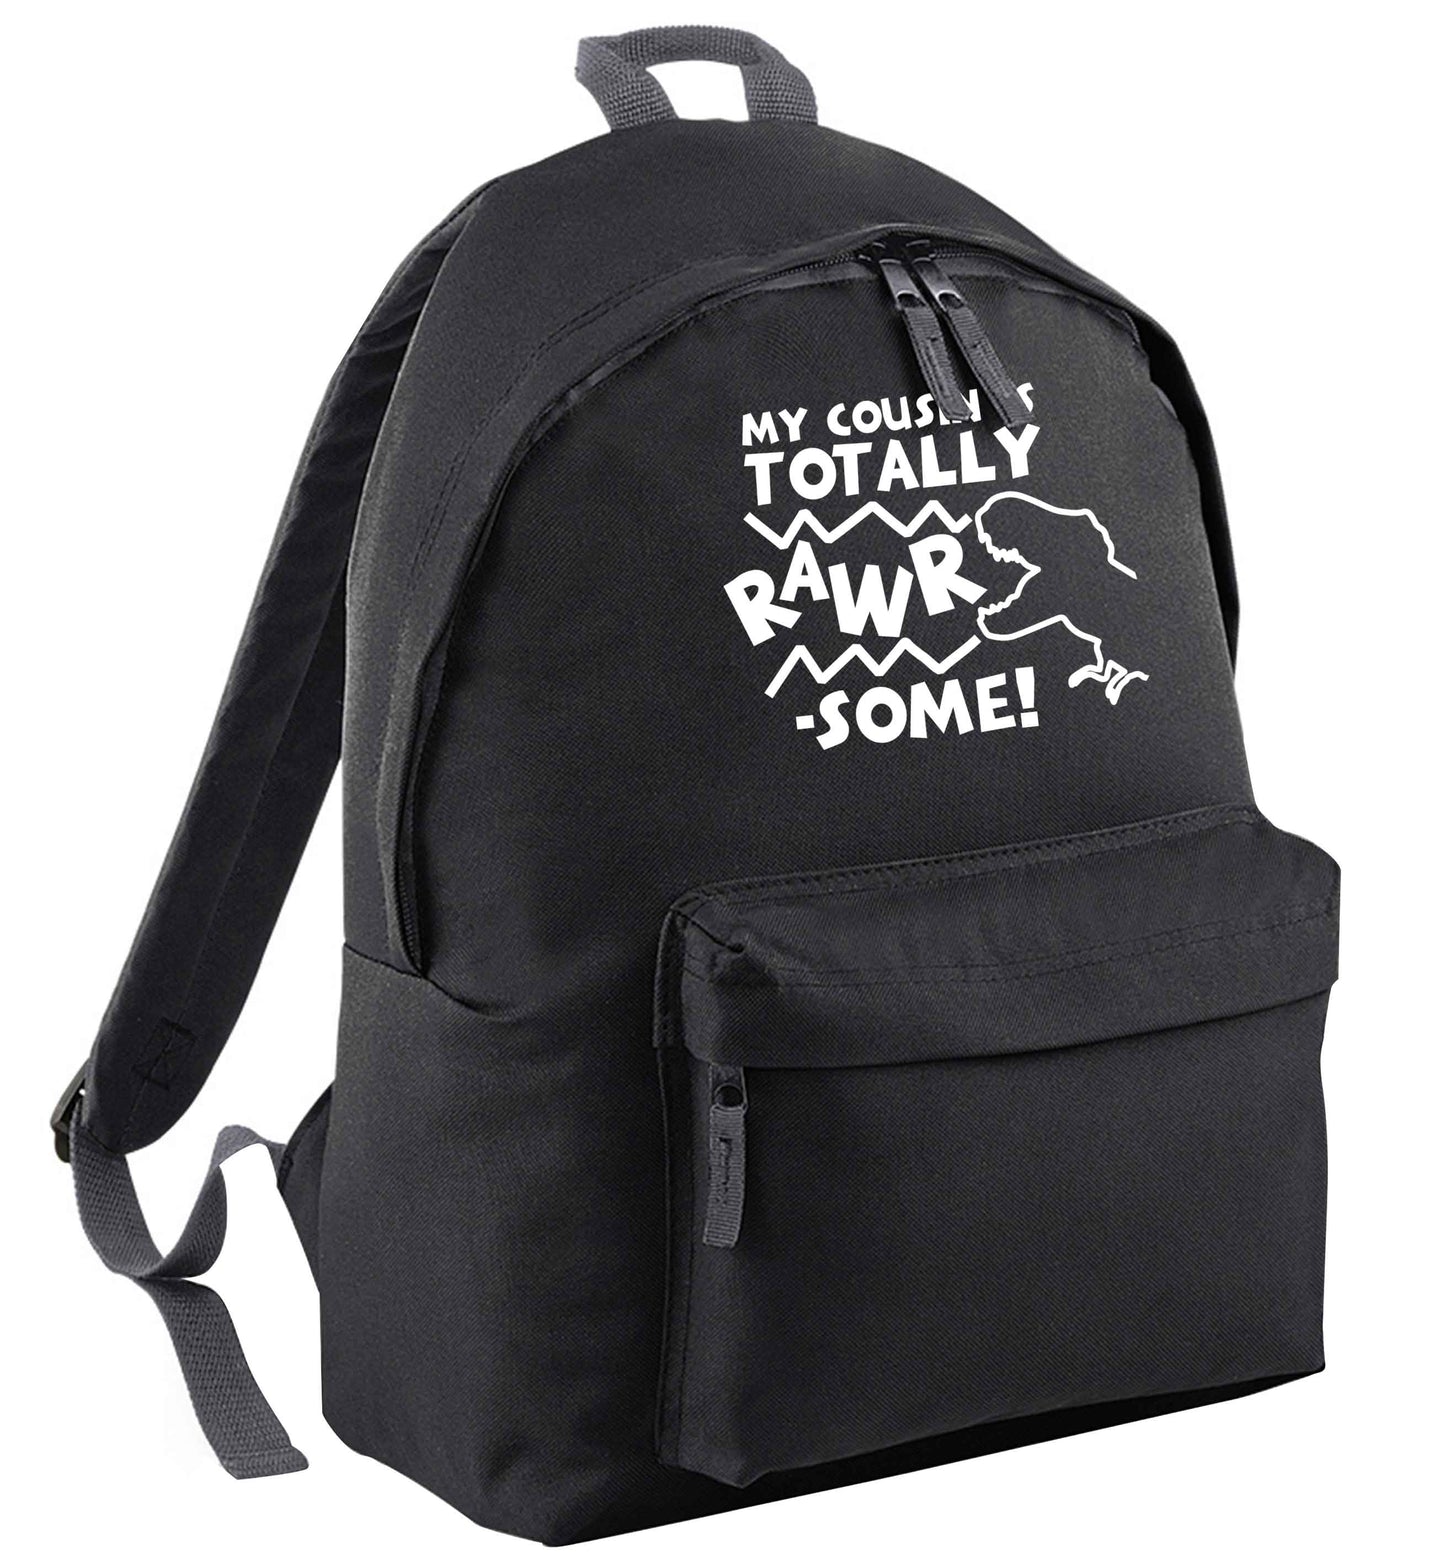 My cousin is totally rawrsome | Children's backpack